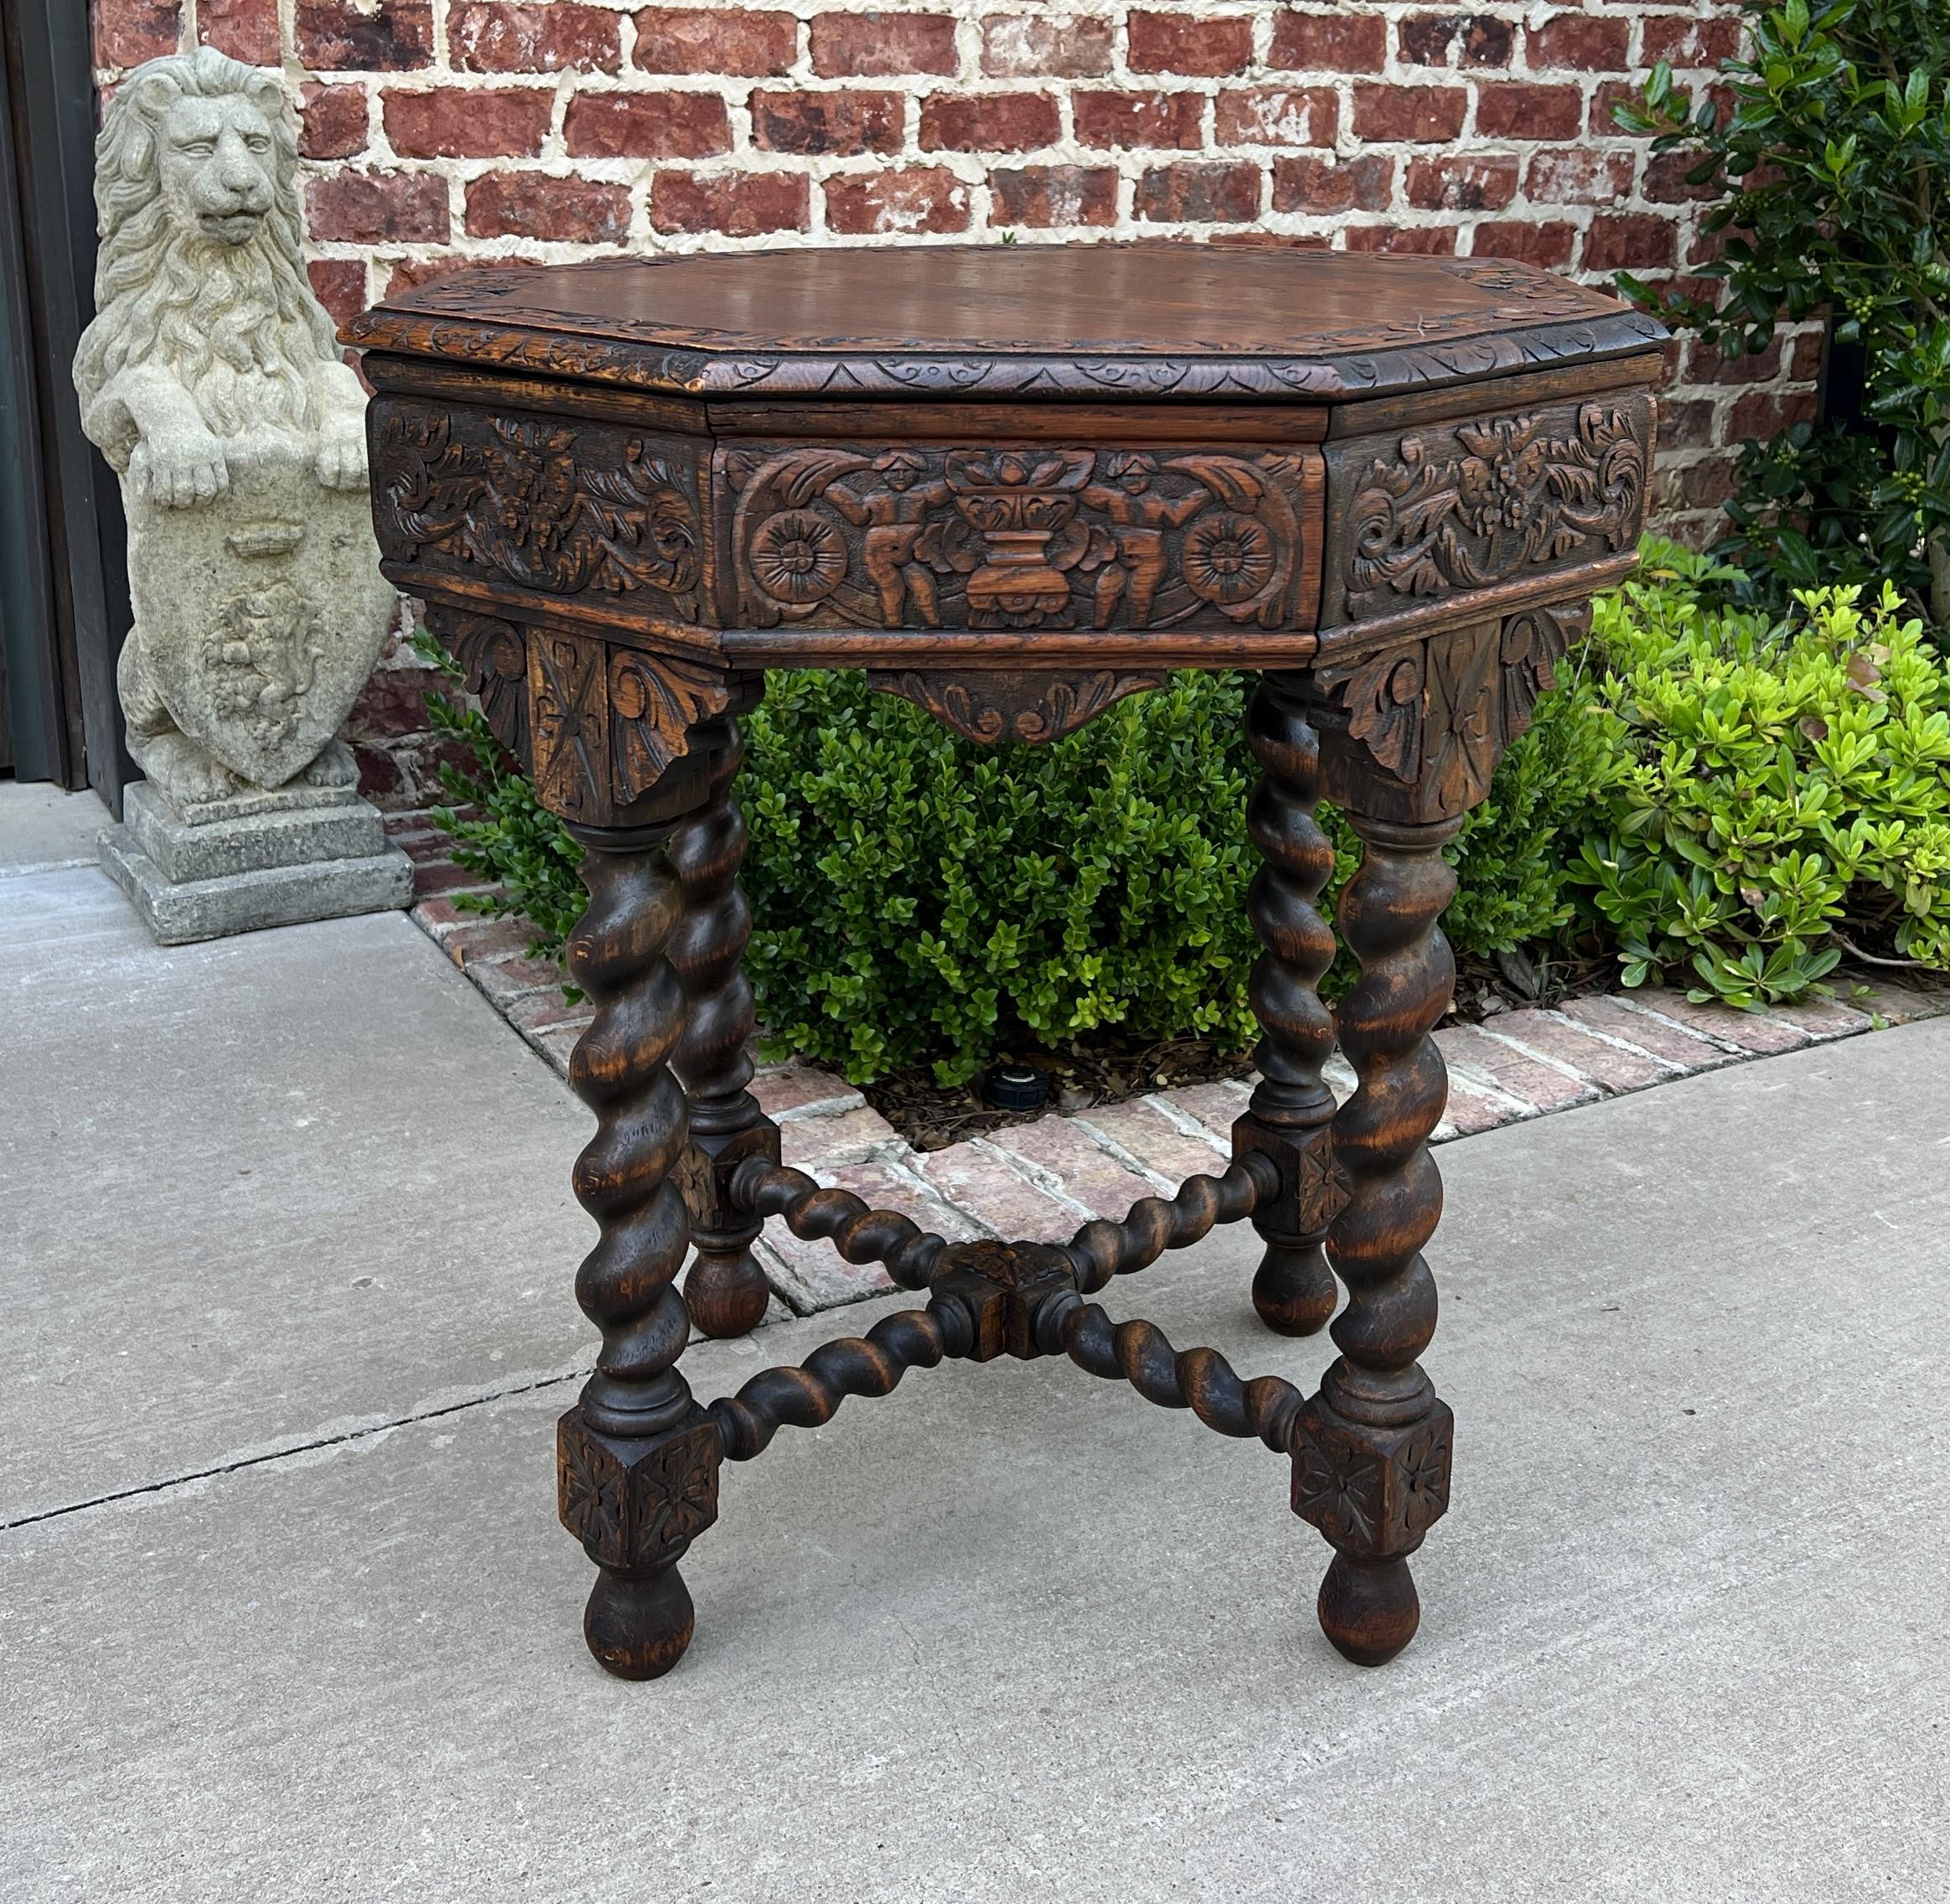 HIGHLY CARVED Late 19th Century Antique French Oak Octagonal BARLEY TWIST Entry, Hall, Sofa, Center, Parlor or End Table ~~Victorian Era Renaissance Revival
~~circa 1890s

These versatile tables were very popular in late Victorian era French